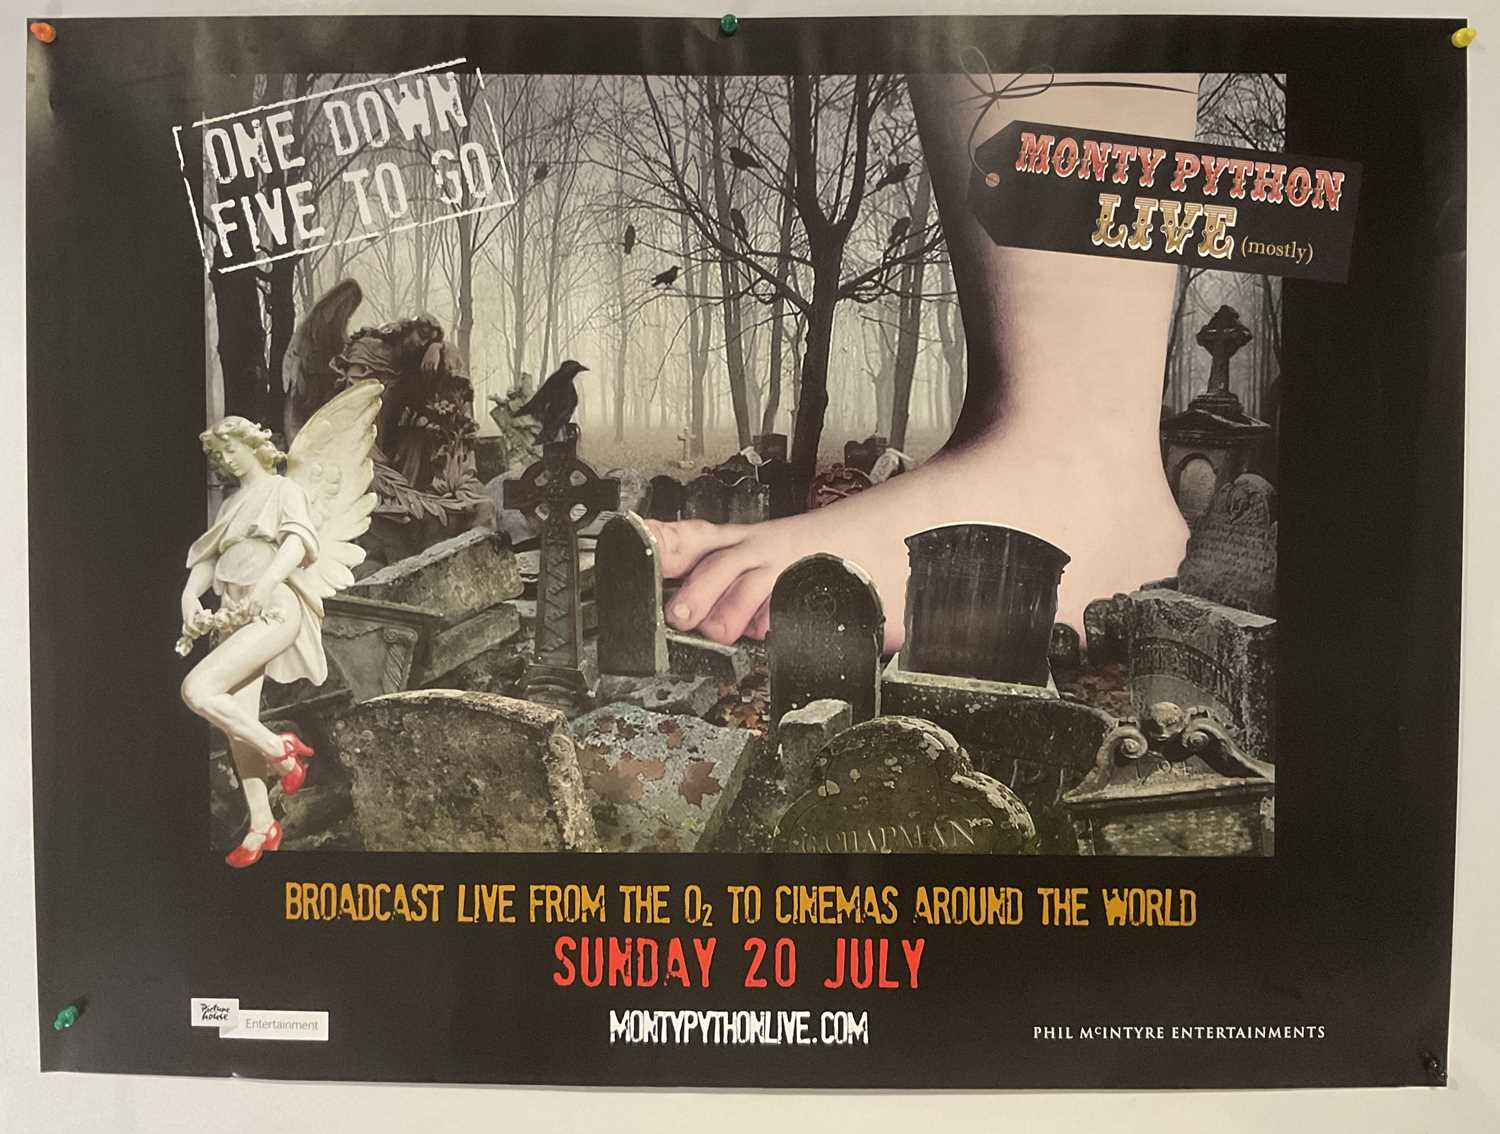 MONTY PYTHON LIVE (MOSTLY) (2014) 2 UK Quad double-sided film posters, two different styles, artwork - Image 2 of 3